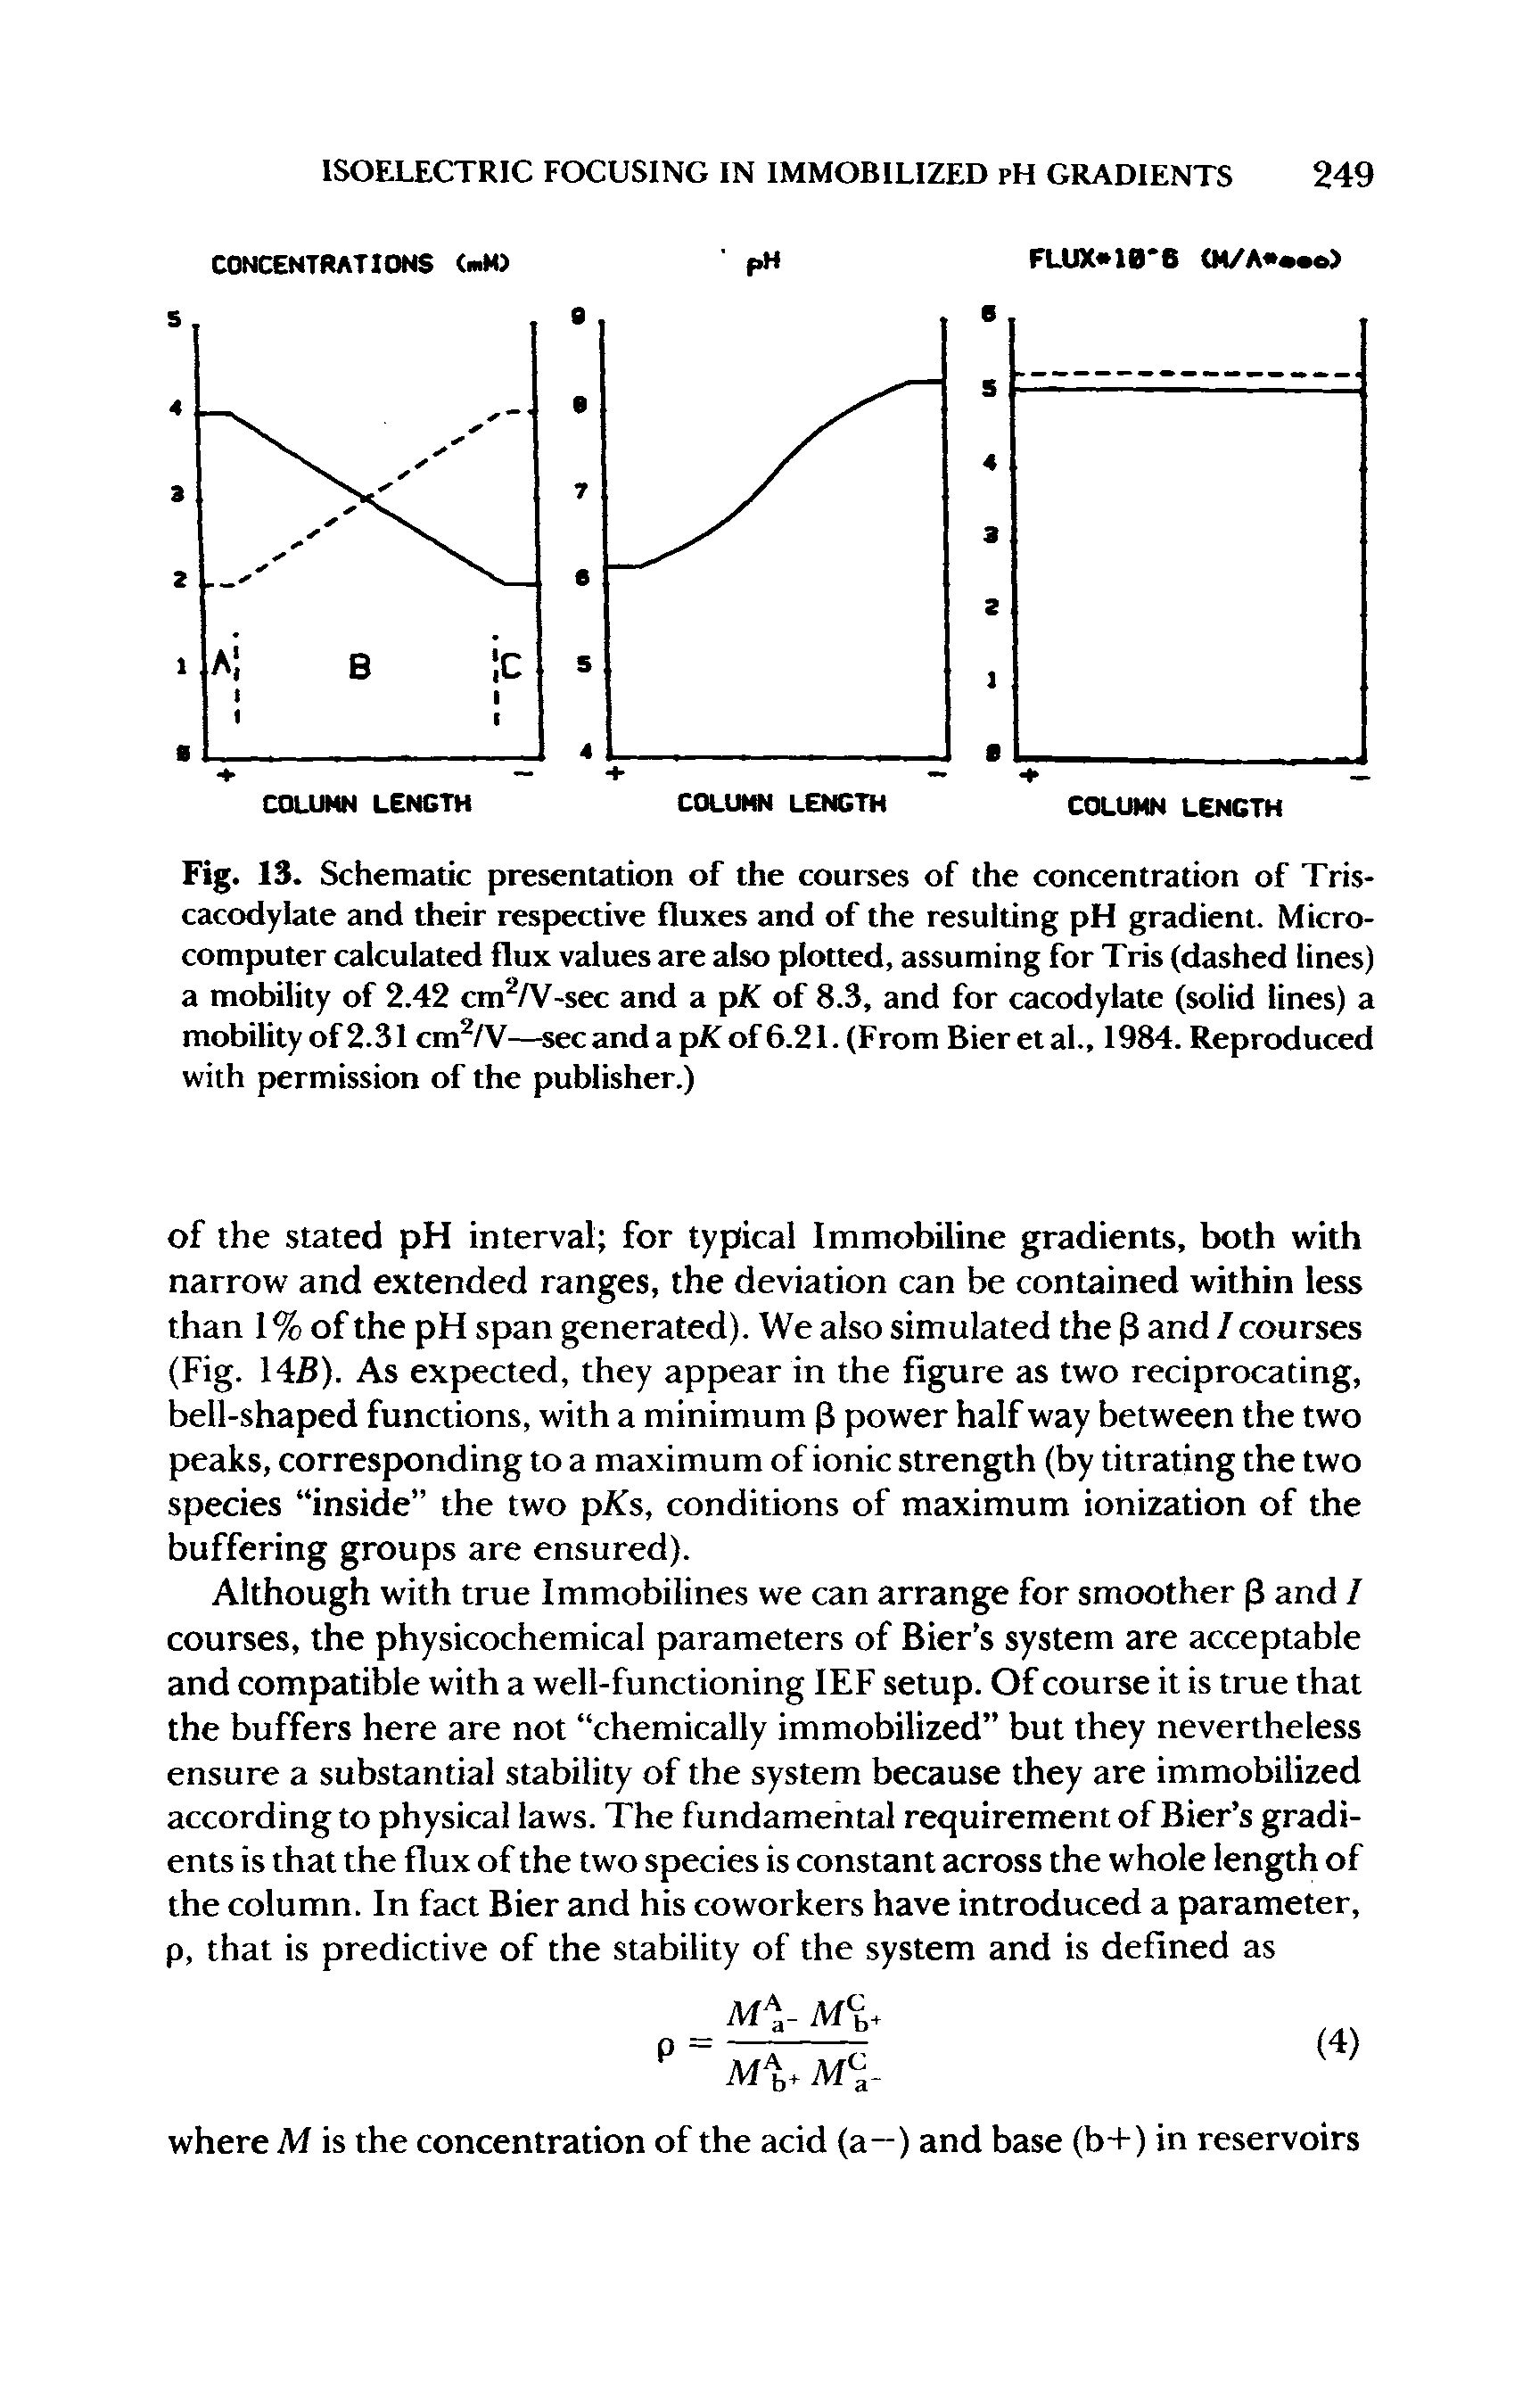 Fig. 13. Schematic presentation of the courses of the concentration of Tris-cacodylate and their respective fluxes and of the resulting pH gradient. Microcomputer calculated flux values are also plotted, assuming for Tris (dashed lines) a mobility of 2.42 cm A -sec and a pfC of 8.3, and for cacodylate (solid lines) a mobility of 2.31 cm /V— secandapKof6.21. (From Bier etal., 1984. Reproduced with permission of the publisher.)...